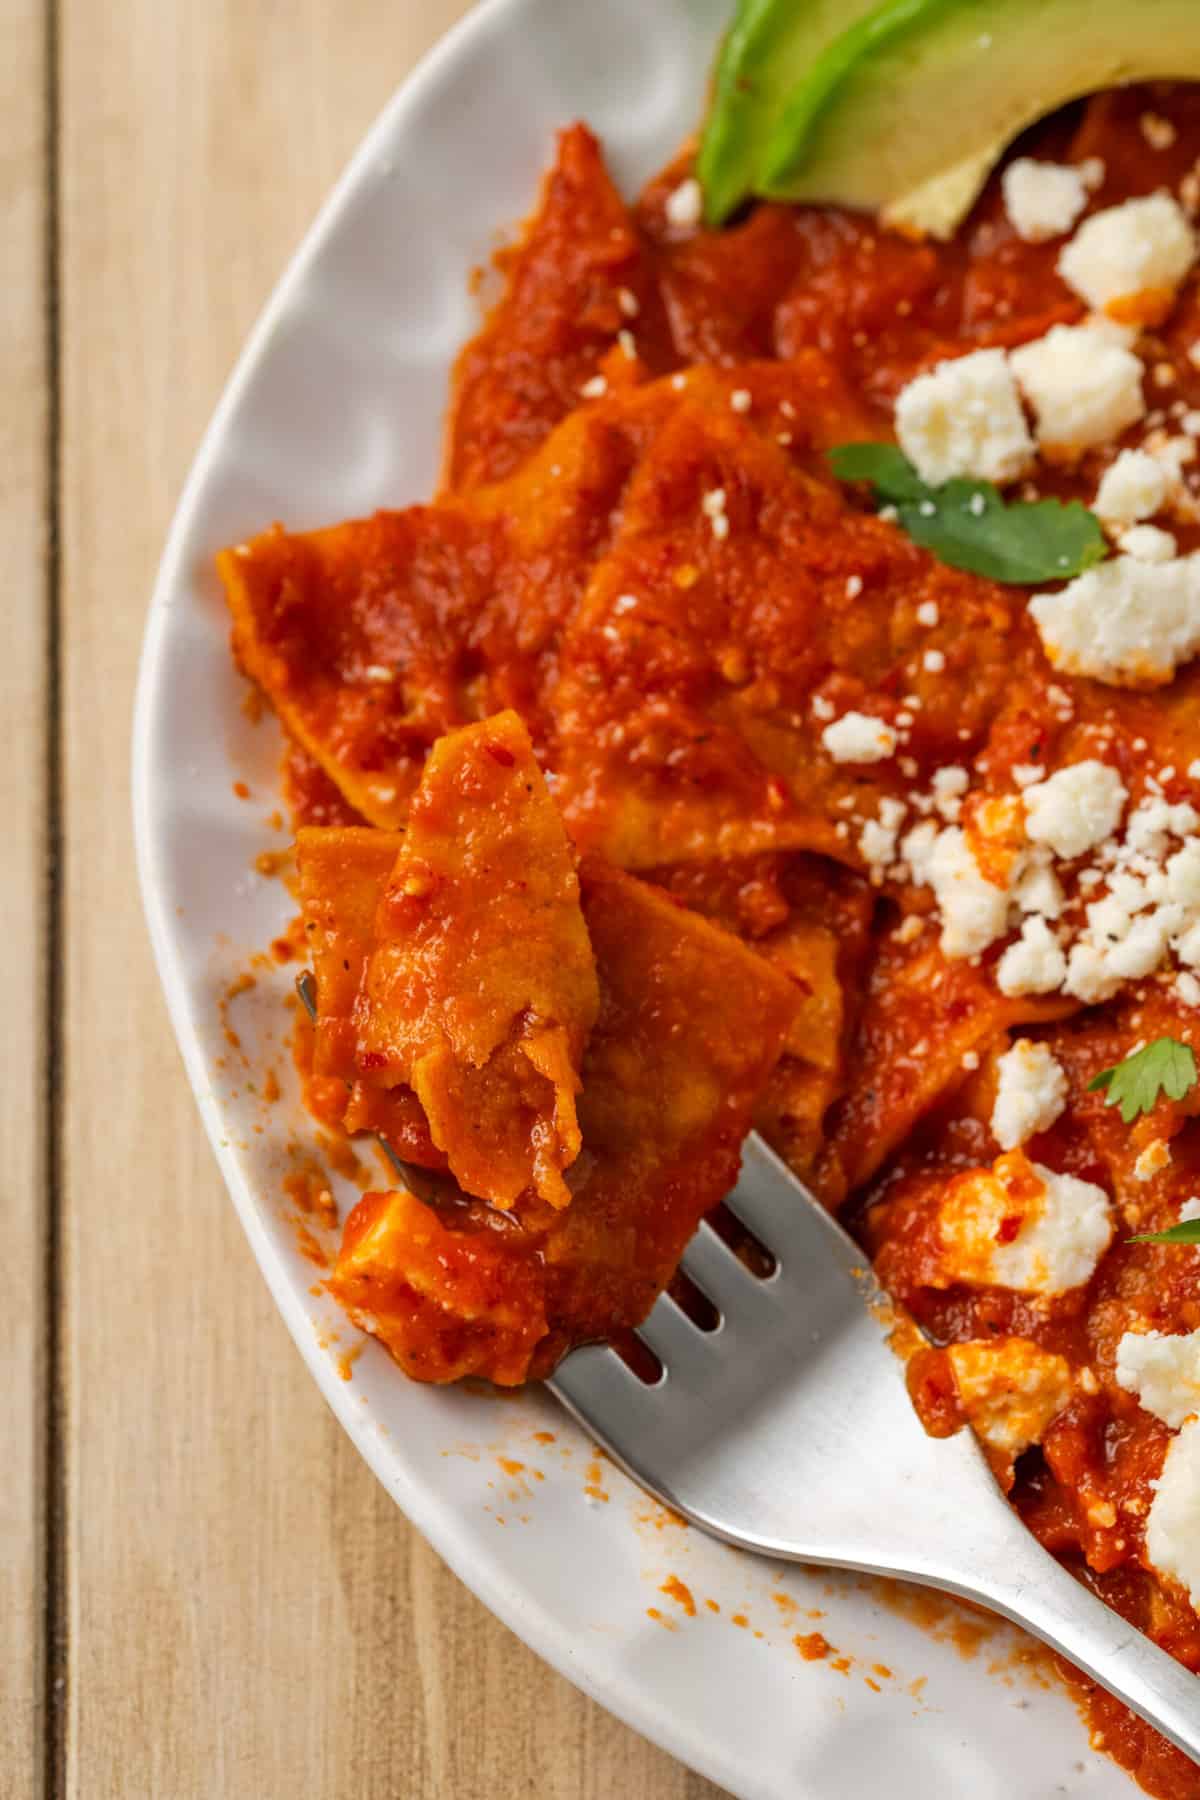 A fork cuts into a plate of chilaquiles rojos, shown in a half-view that features the red sauce.